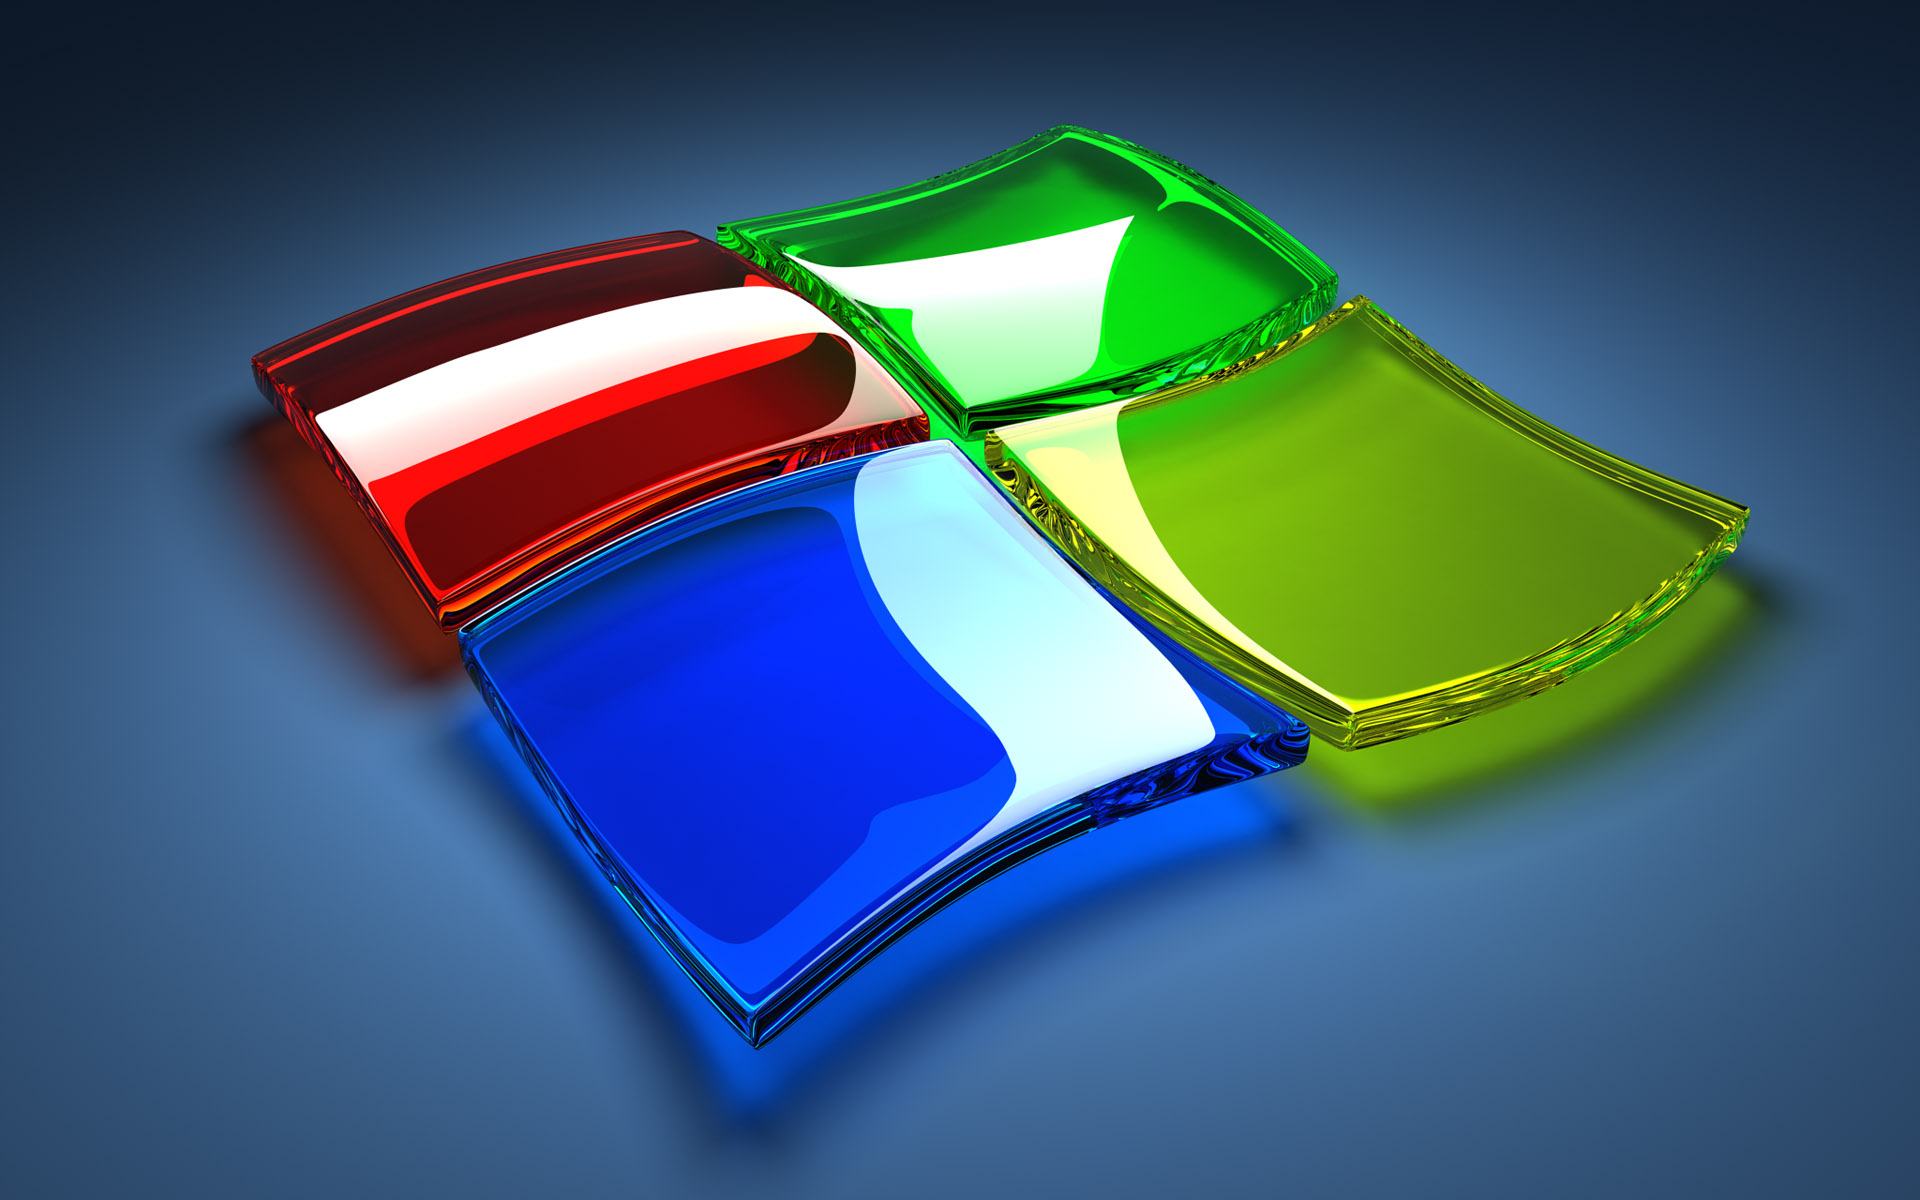 Free Wallpapers For PC Windows 7 - Wallpaper Cave